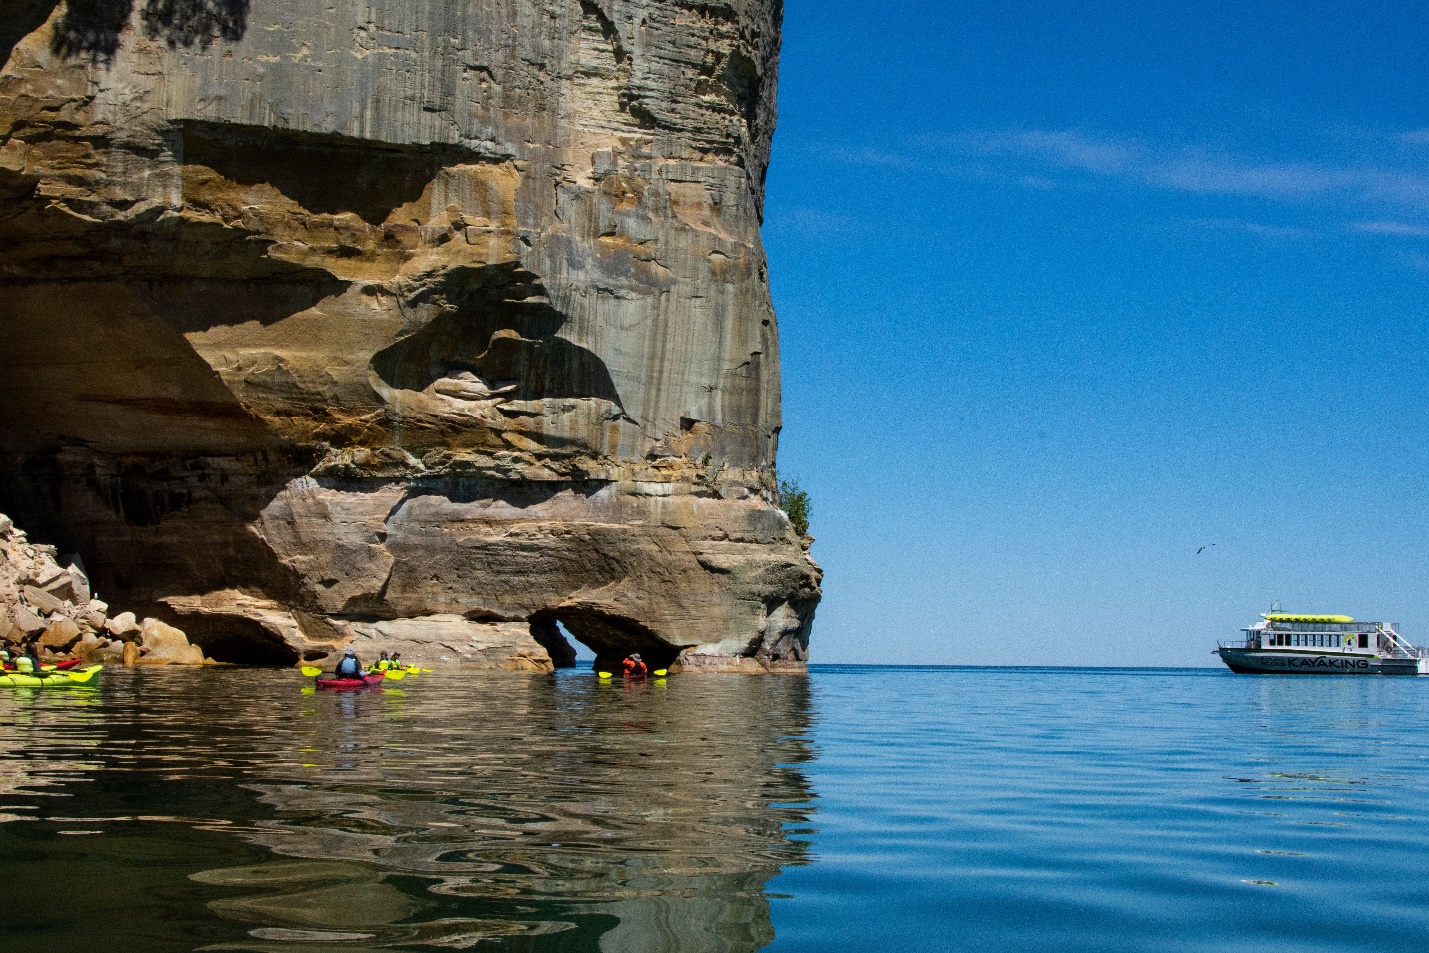 Paddle Through Sea Caves at Pictured Rocks